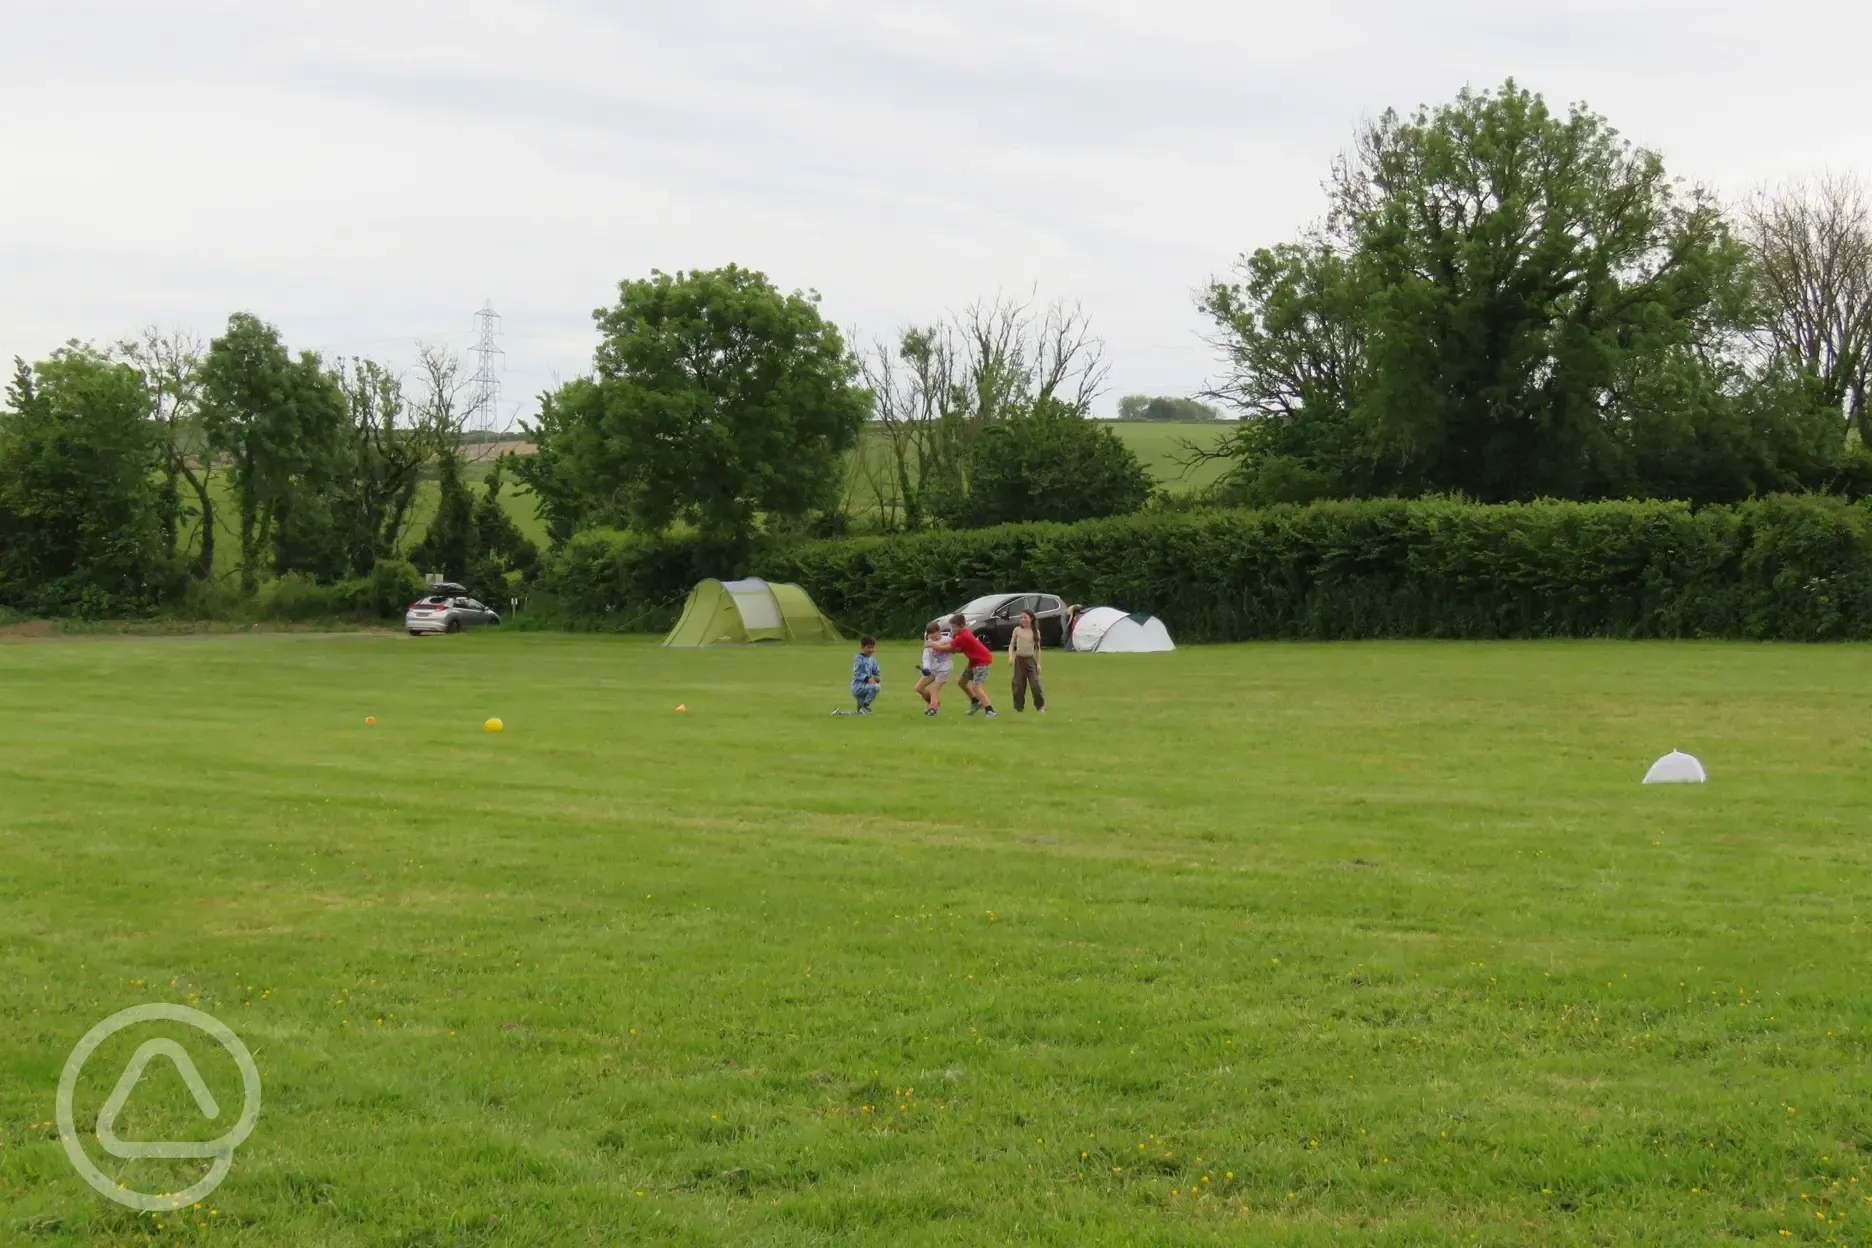 Games on the camping field